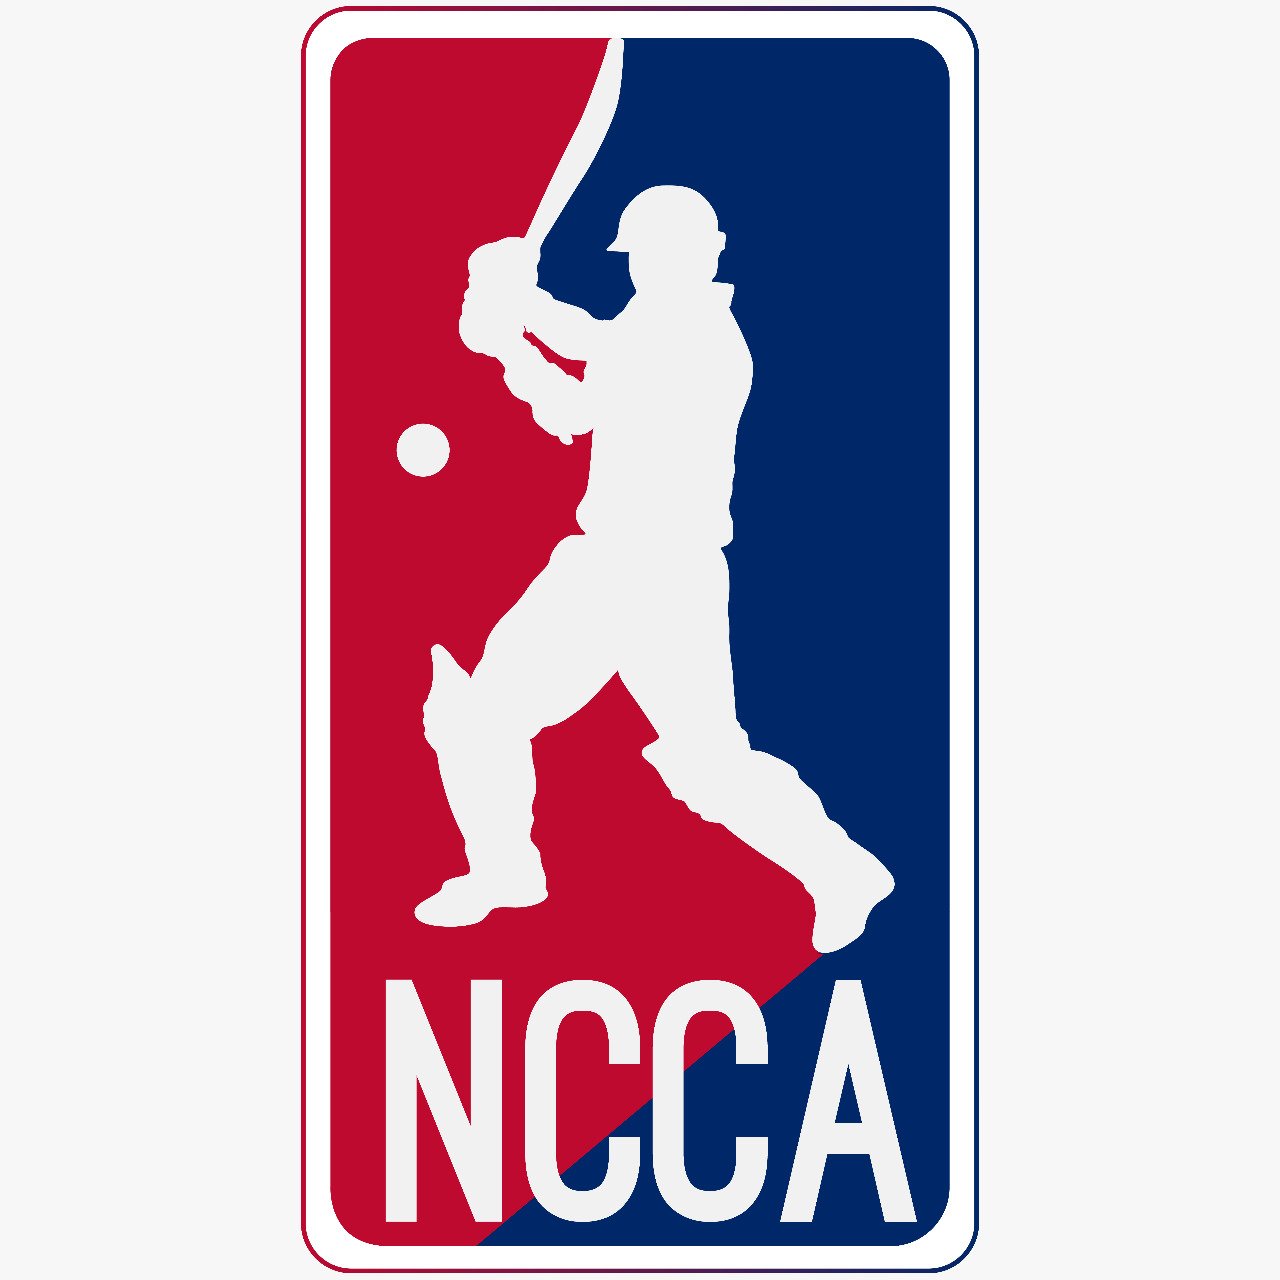 A non-profit organization that promotes college cricket in the United States.